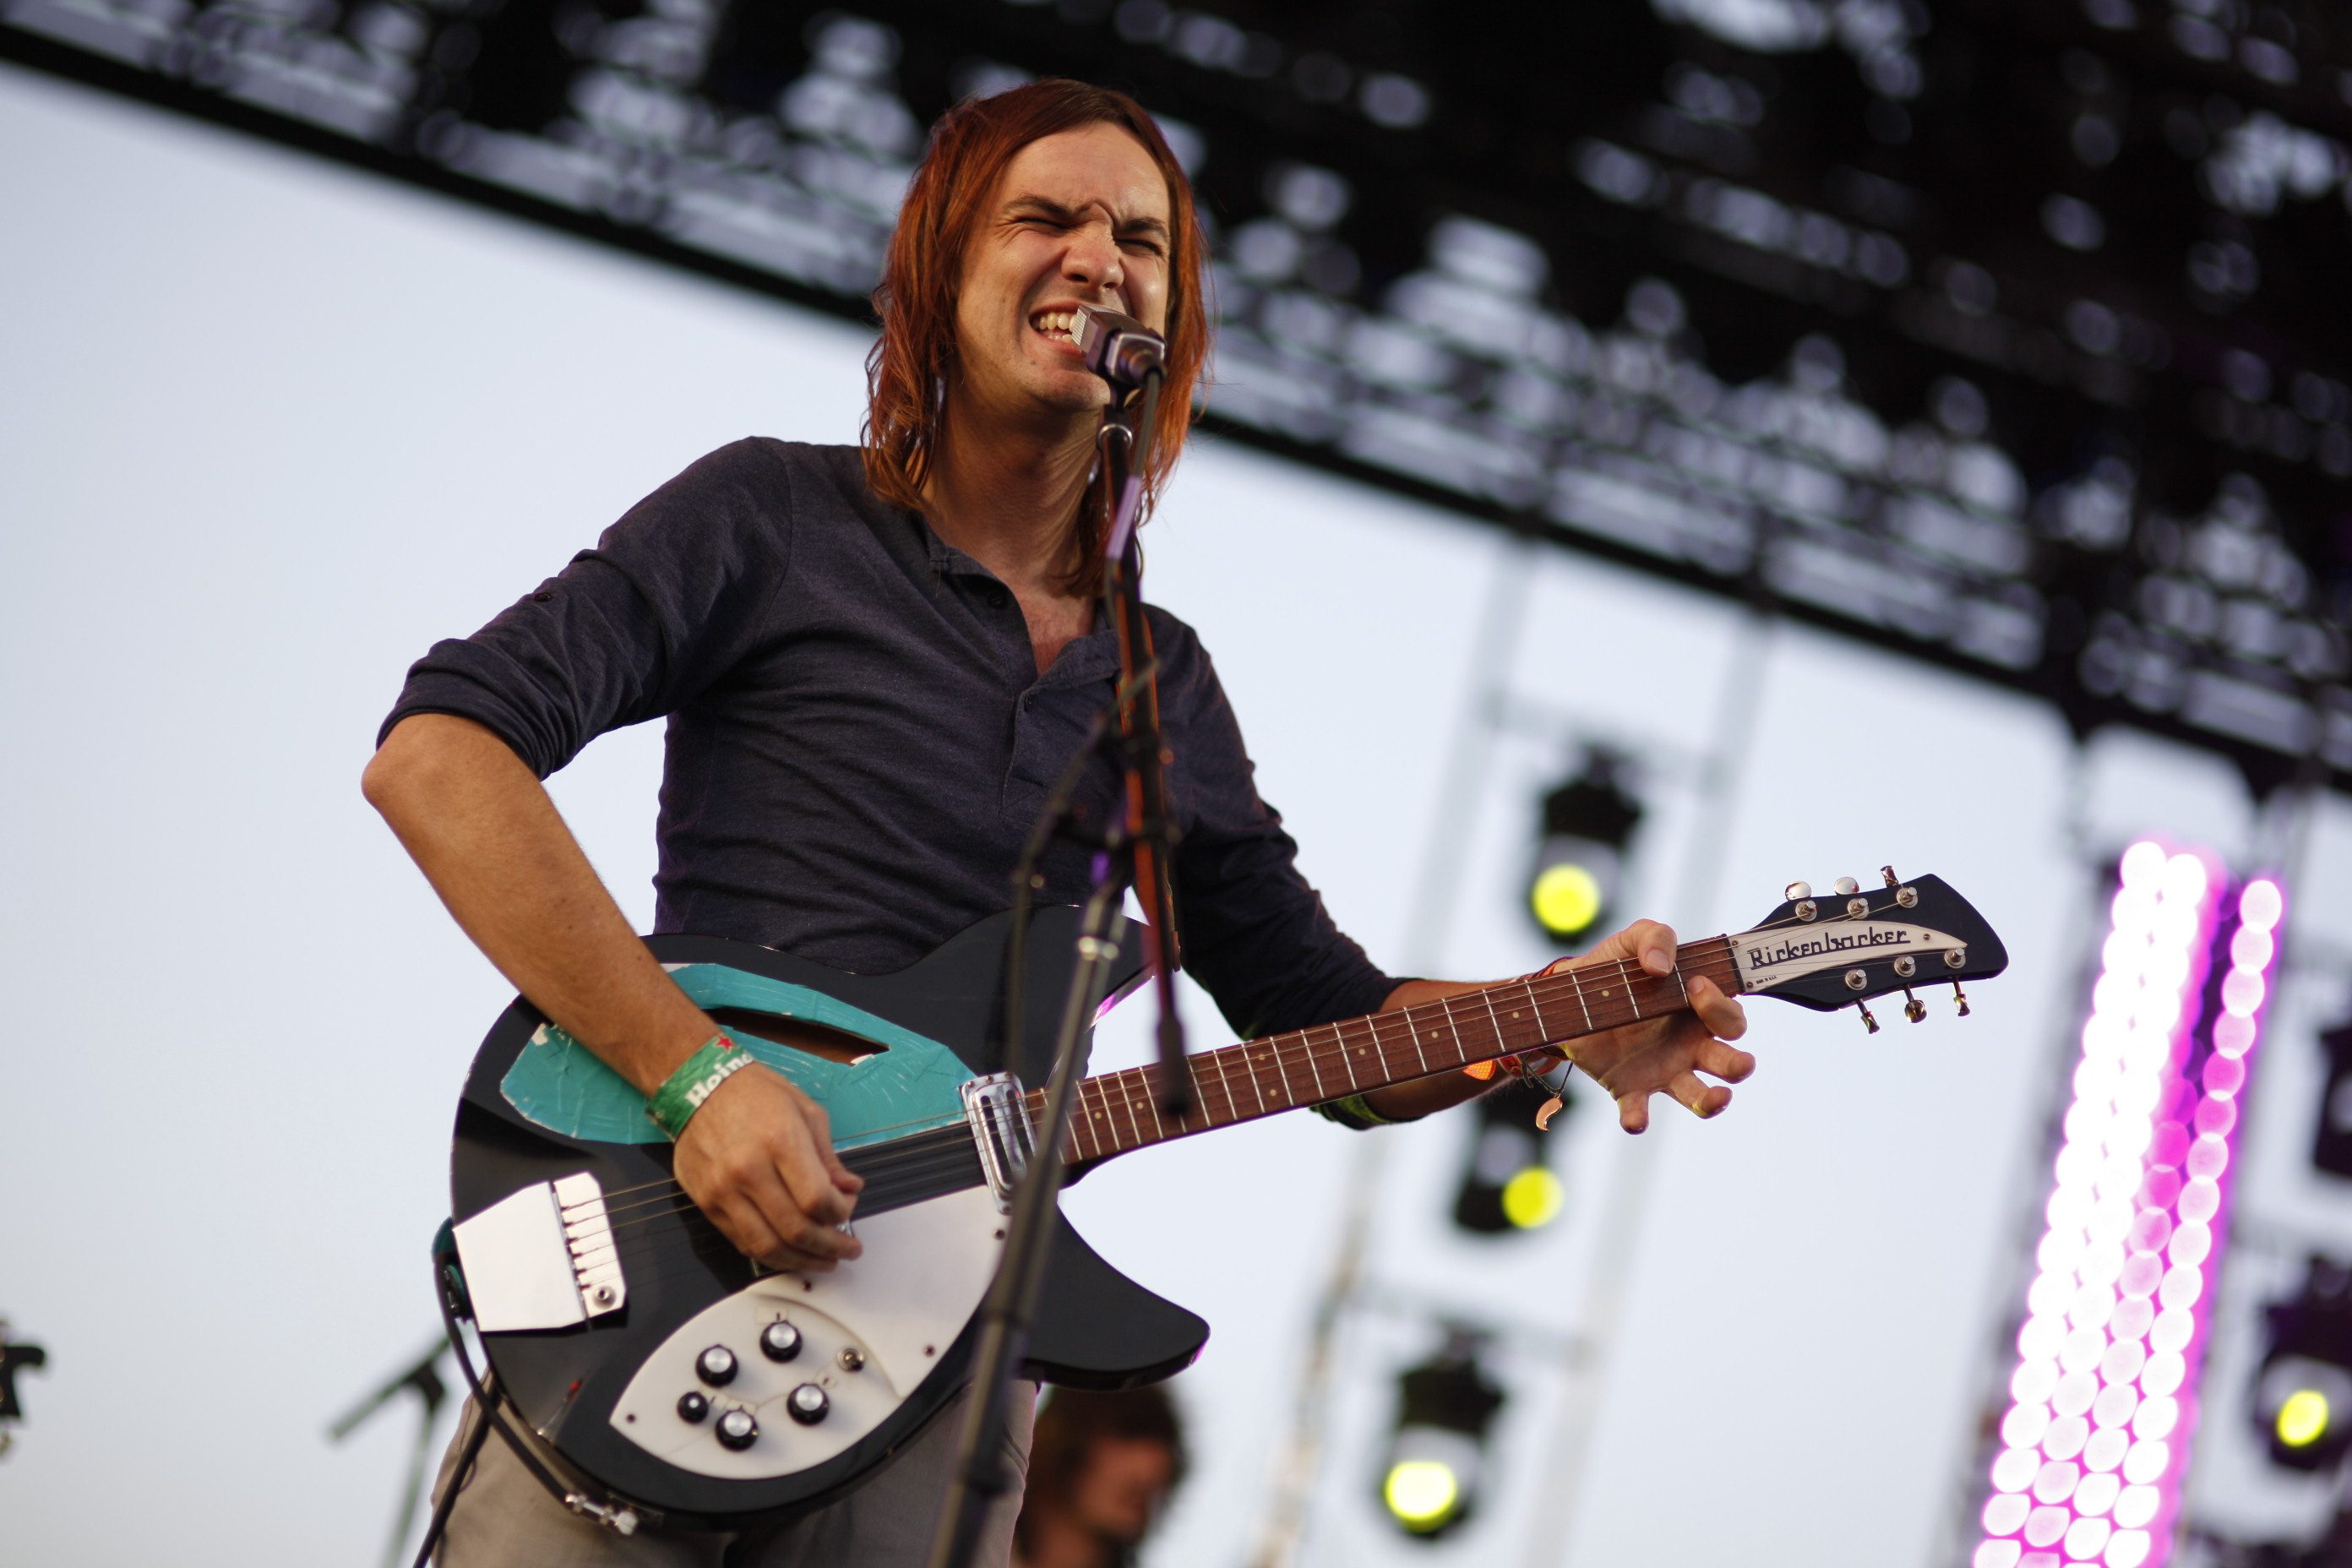 Coachella 2019 Day Two Weekend One Review - Tame Impala Provides Solid If By-The-Numbers Headlining Set as Maggie Rogers and Billie Eilish Impress In Festival Debuts